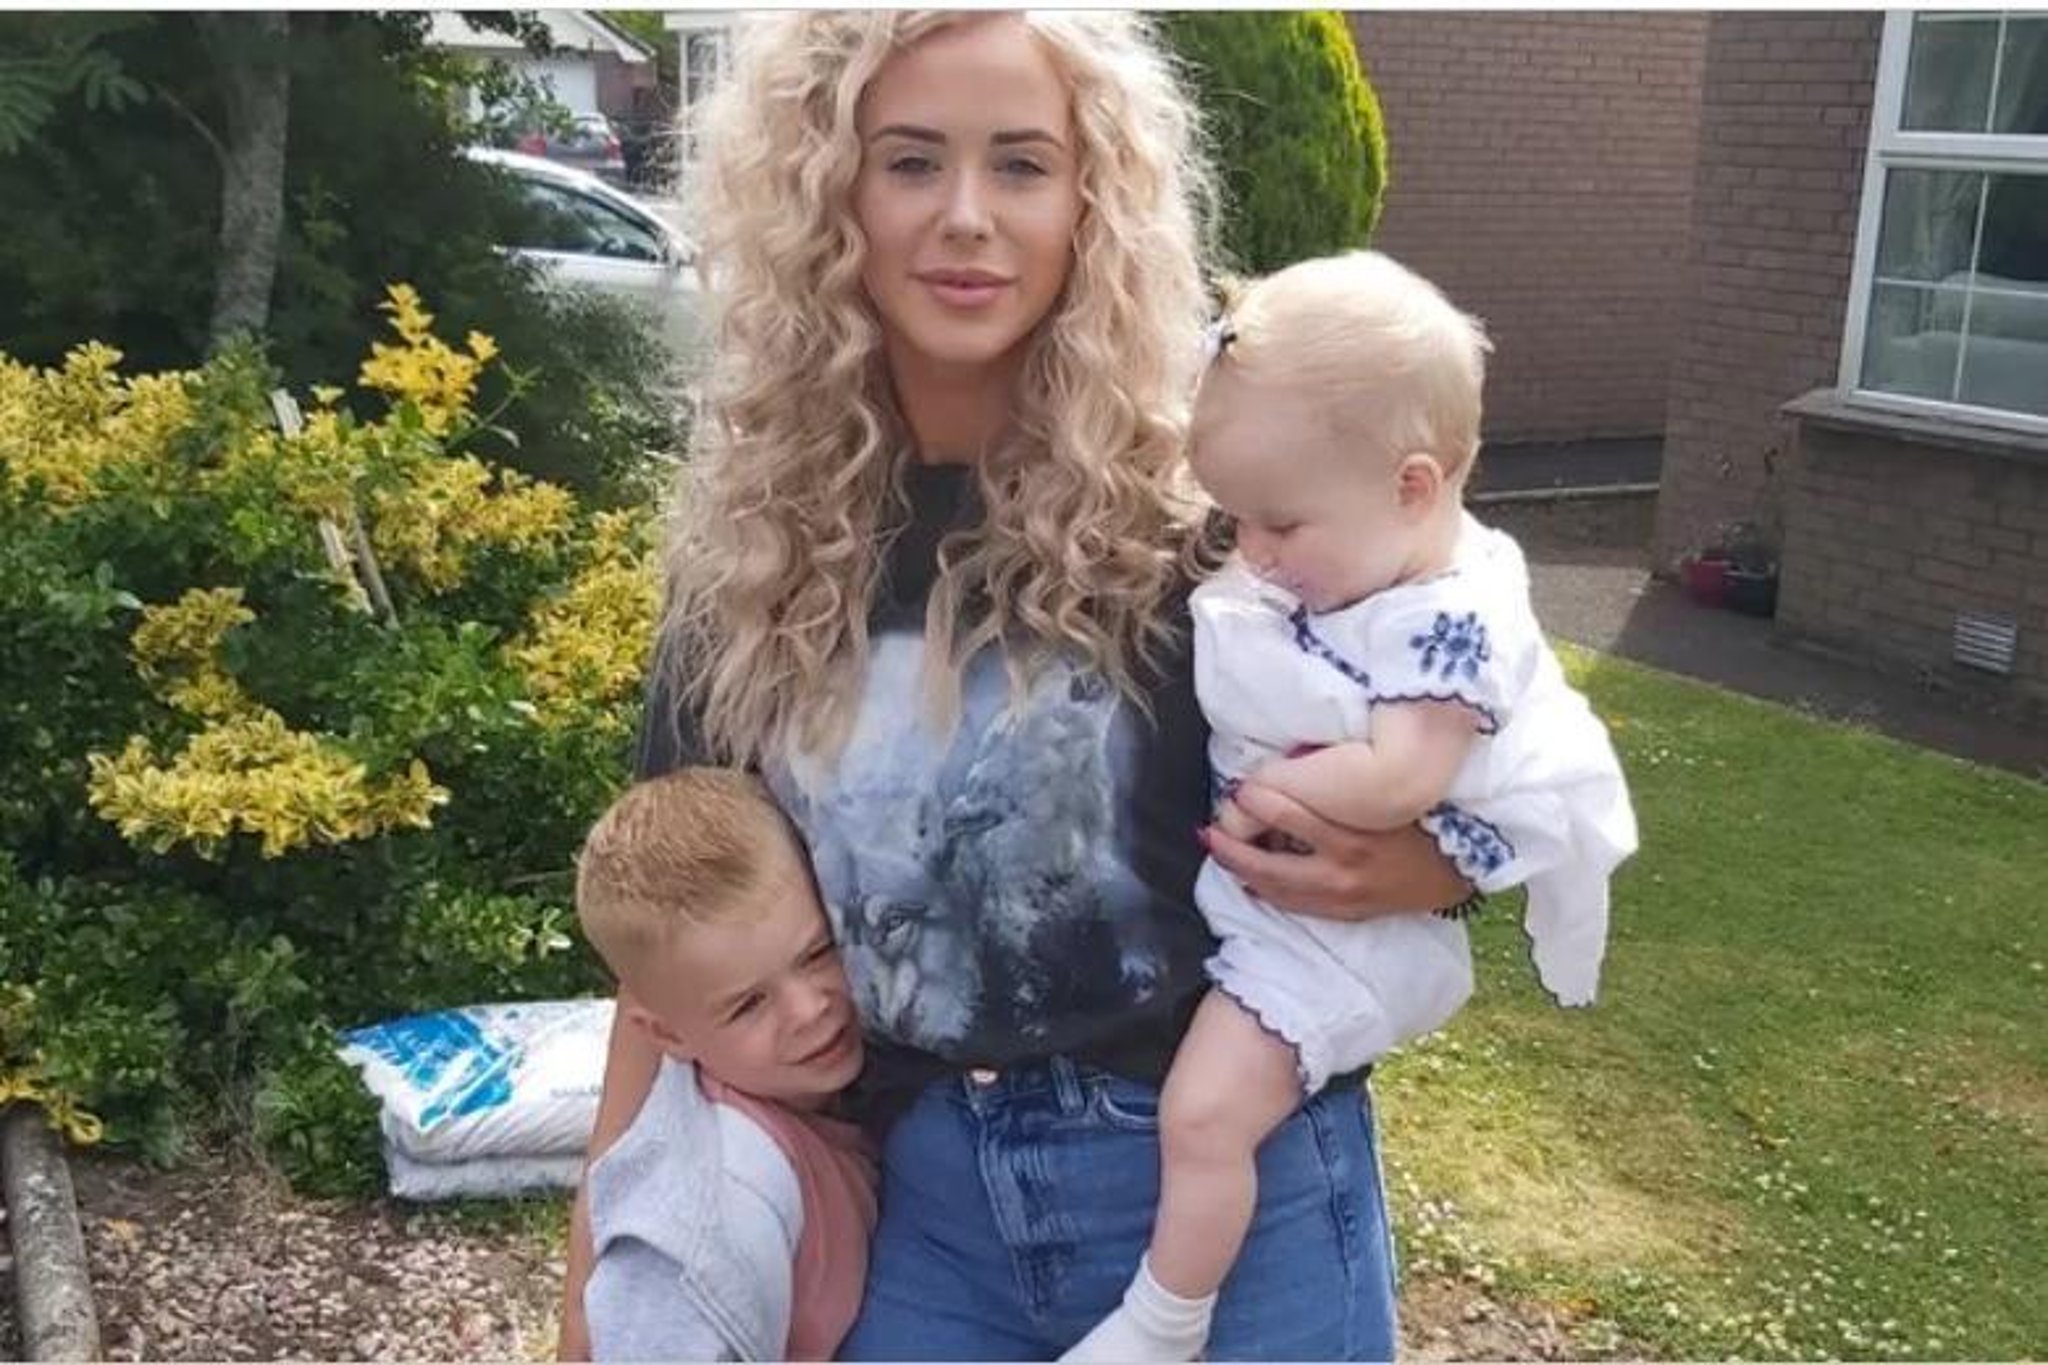 Brave mum-of-two battling breast cancer shaves her head to 'take back control' before chemotherapy